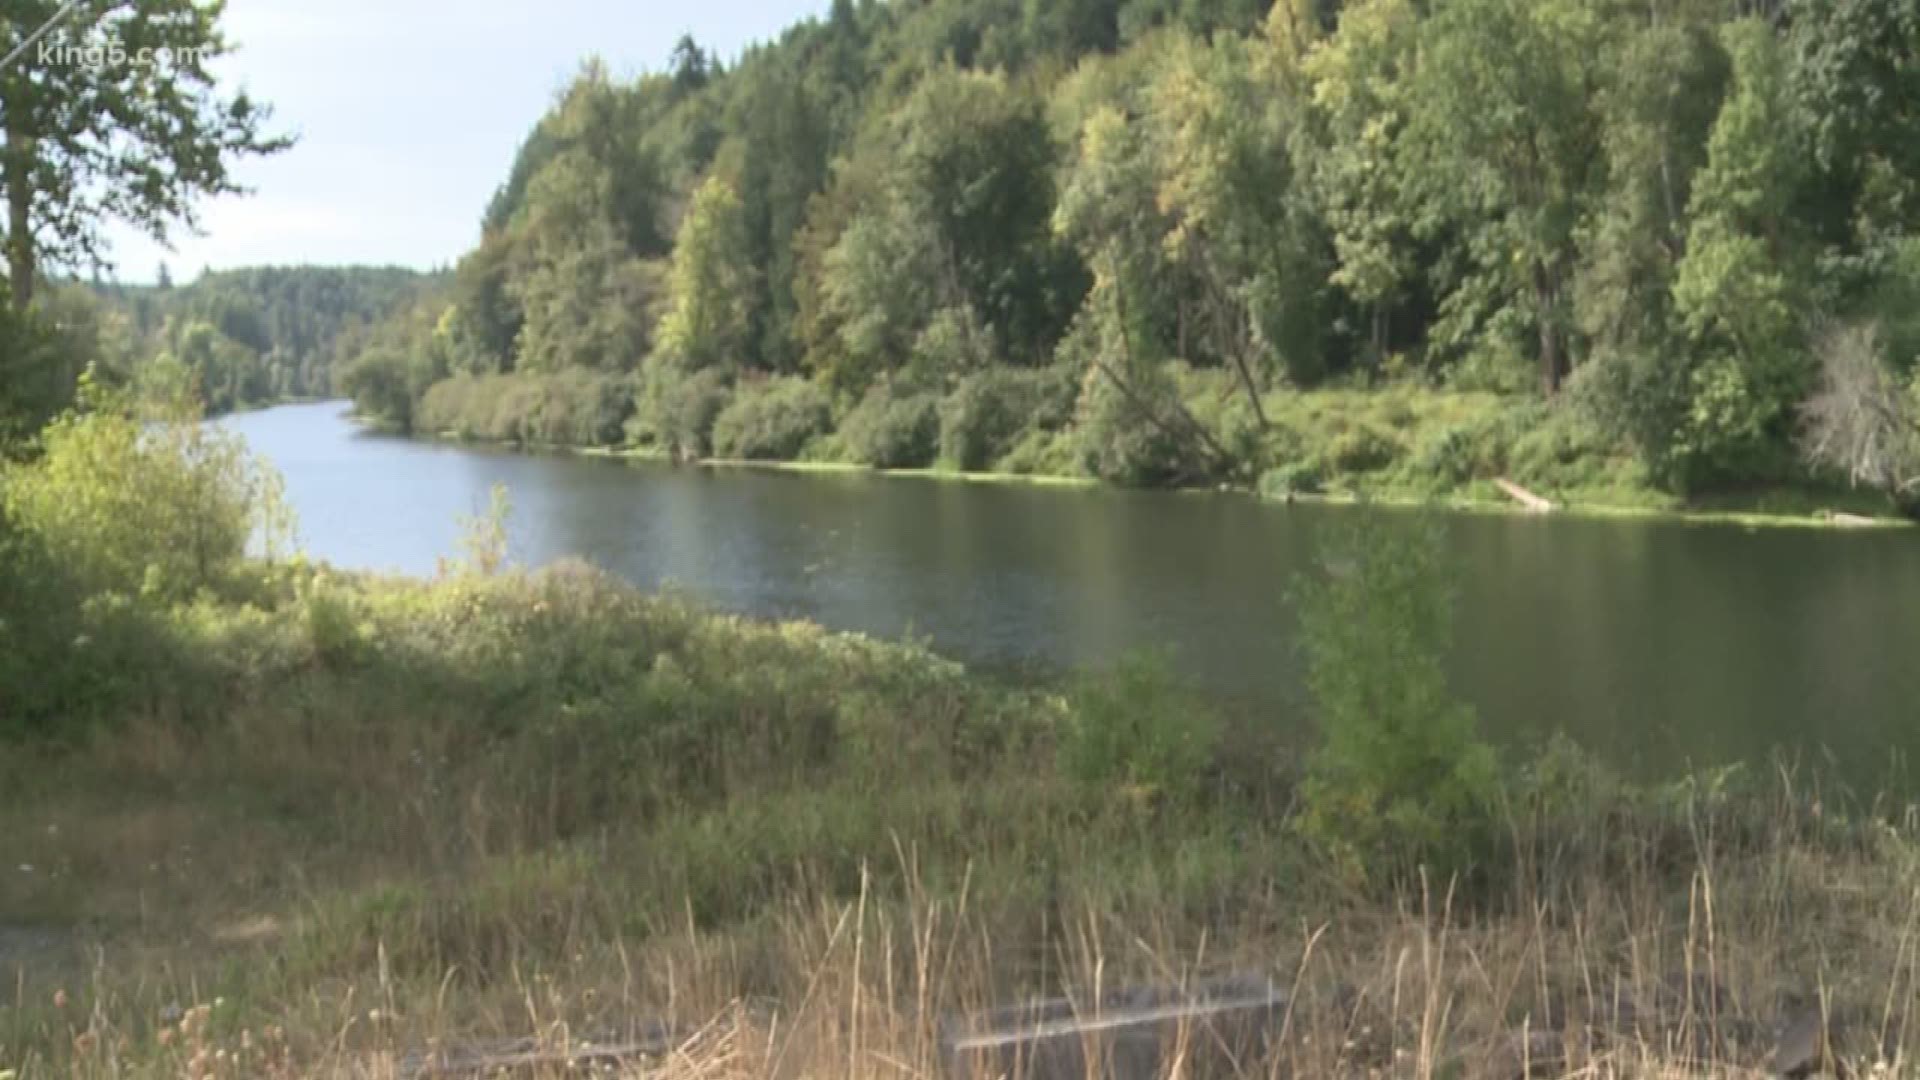 A dam proposed for the Chehalis River is drawing a lot of attention. The dam's purpose would be to reduce flooding in the area south of Pe Ell in Lewis County, but some worry it would hurt vulnerable fish.